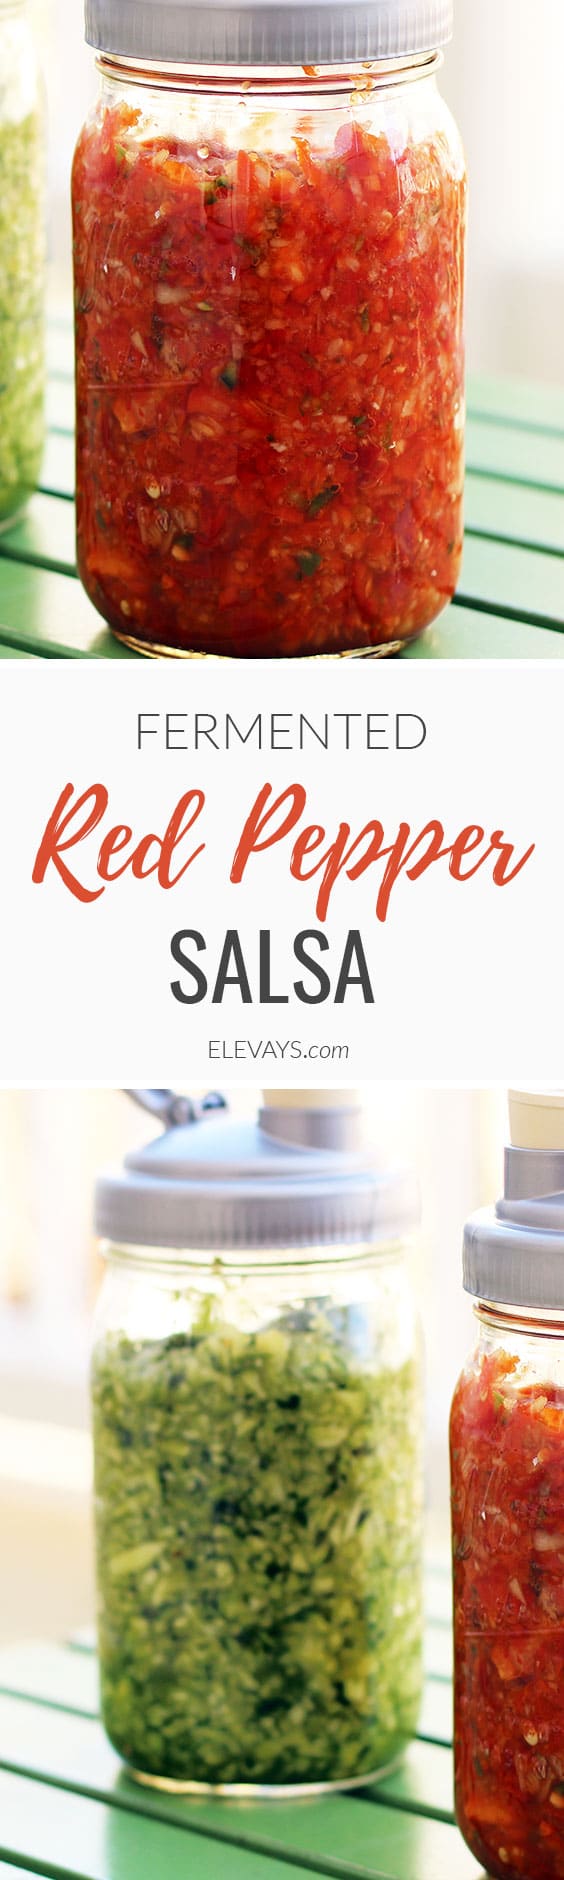 Probiotic rich and great for your gut health, this fermented red pepper salsa is worth the effort. #Fermented #Probiotics #GutHealth #Salsa